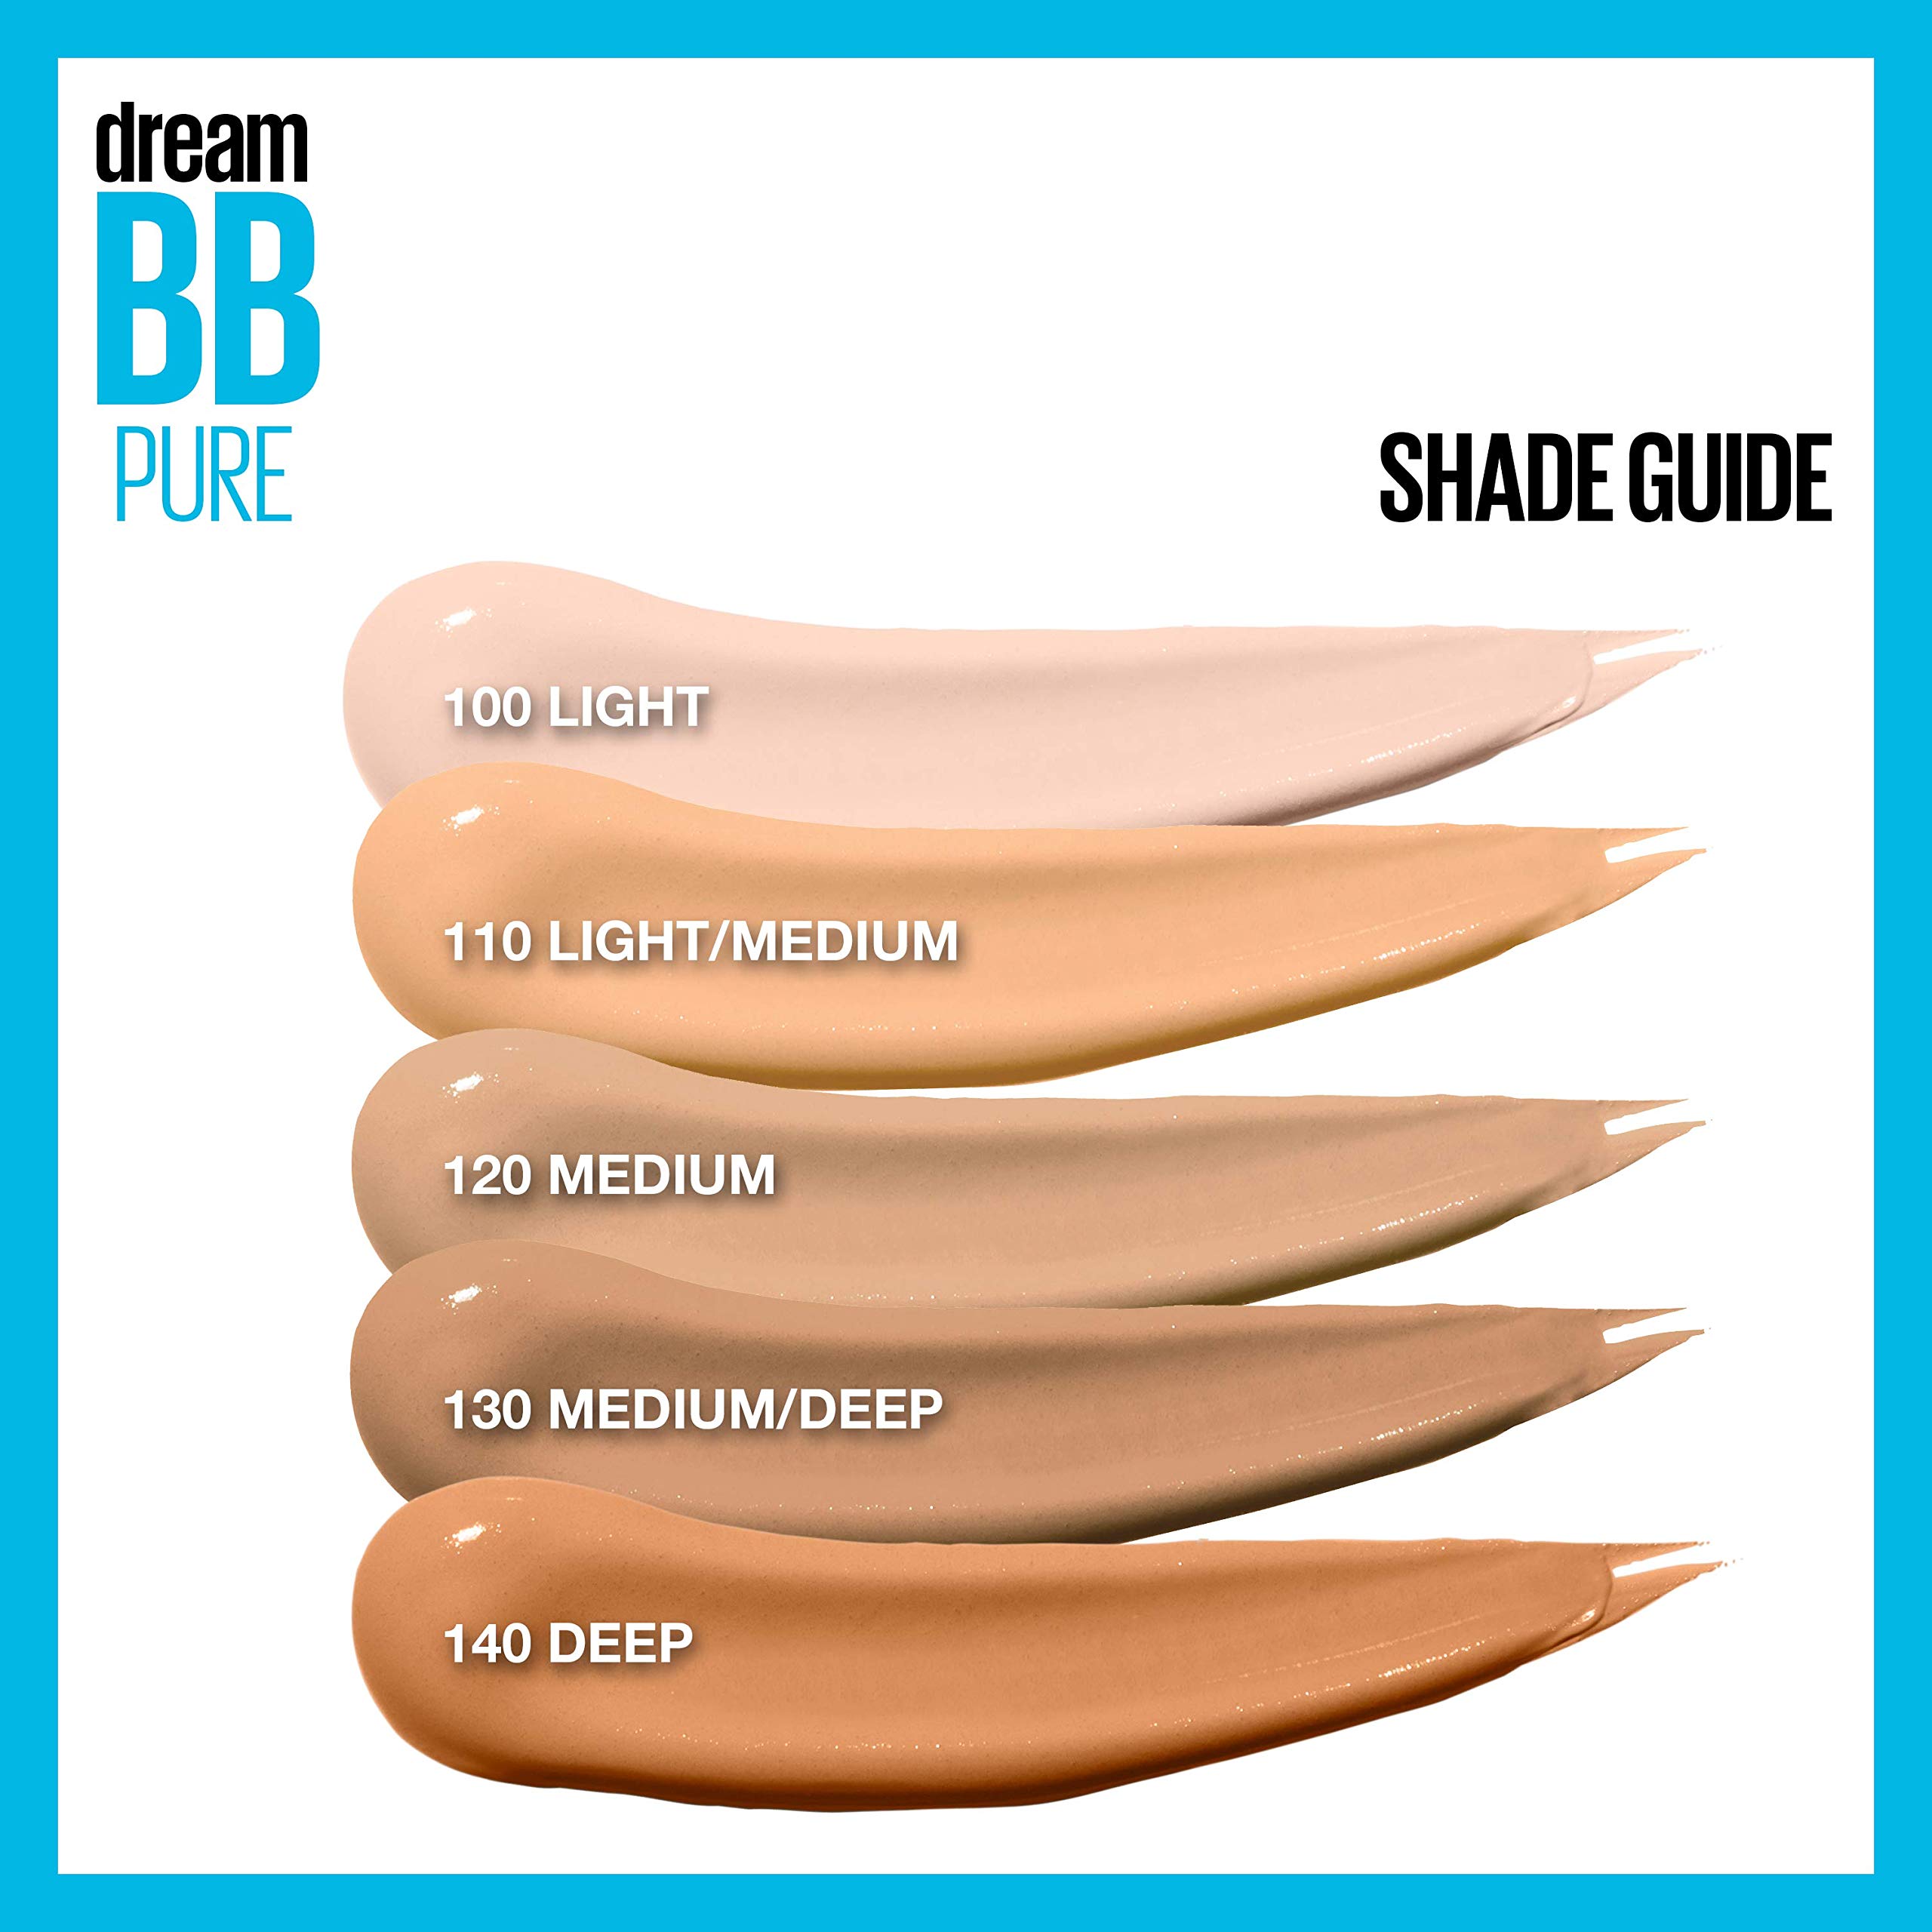 Maybelline New York Dream Pure Skin Clearing BB Cream, 8-in-1 Skin Perfecting Beauty Balm With 2% Salicylic Acid, Sheer Tint Coverage, Oil-Free, Medium, 1 Count